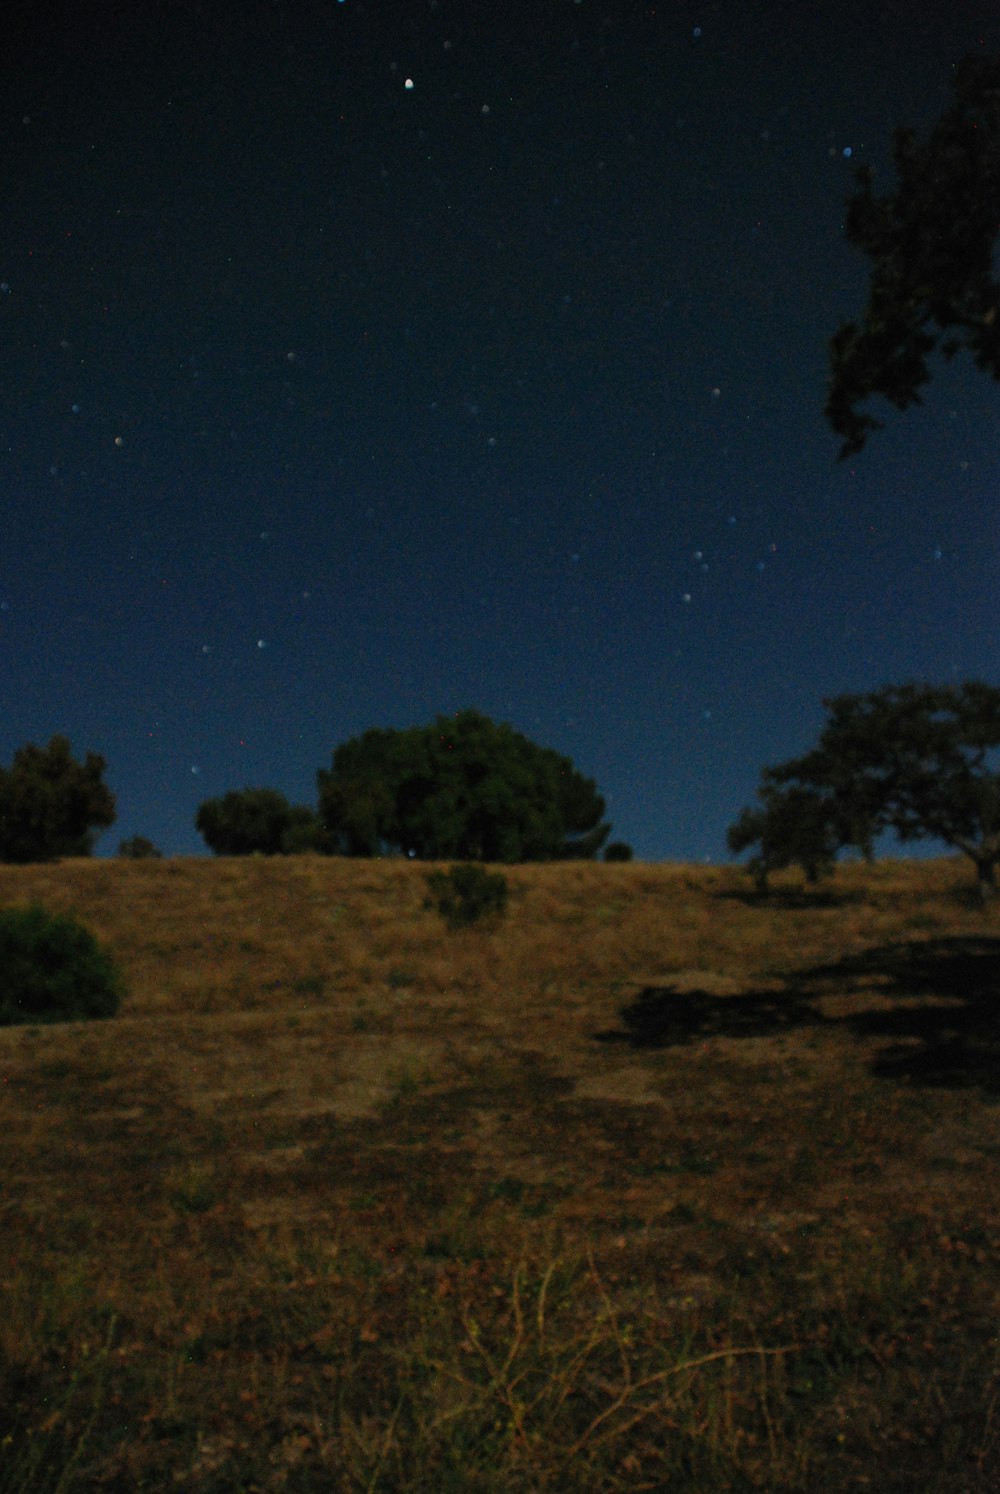 a grassy field with trees under a night sky